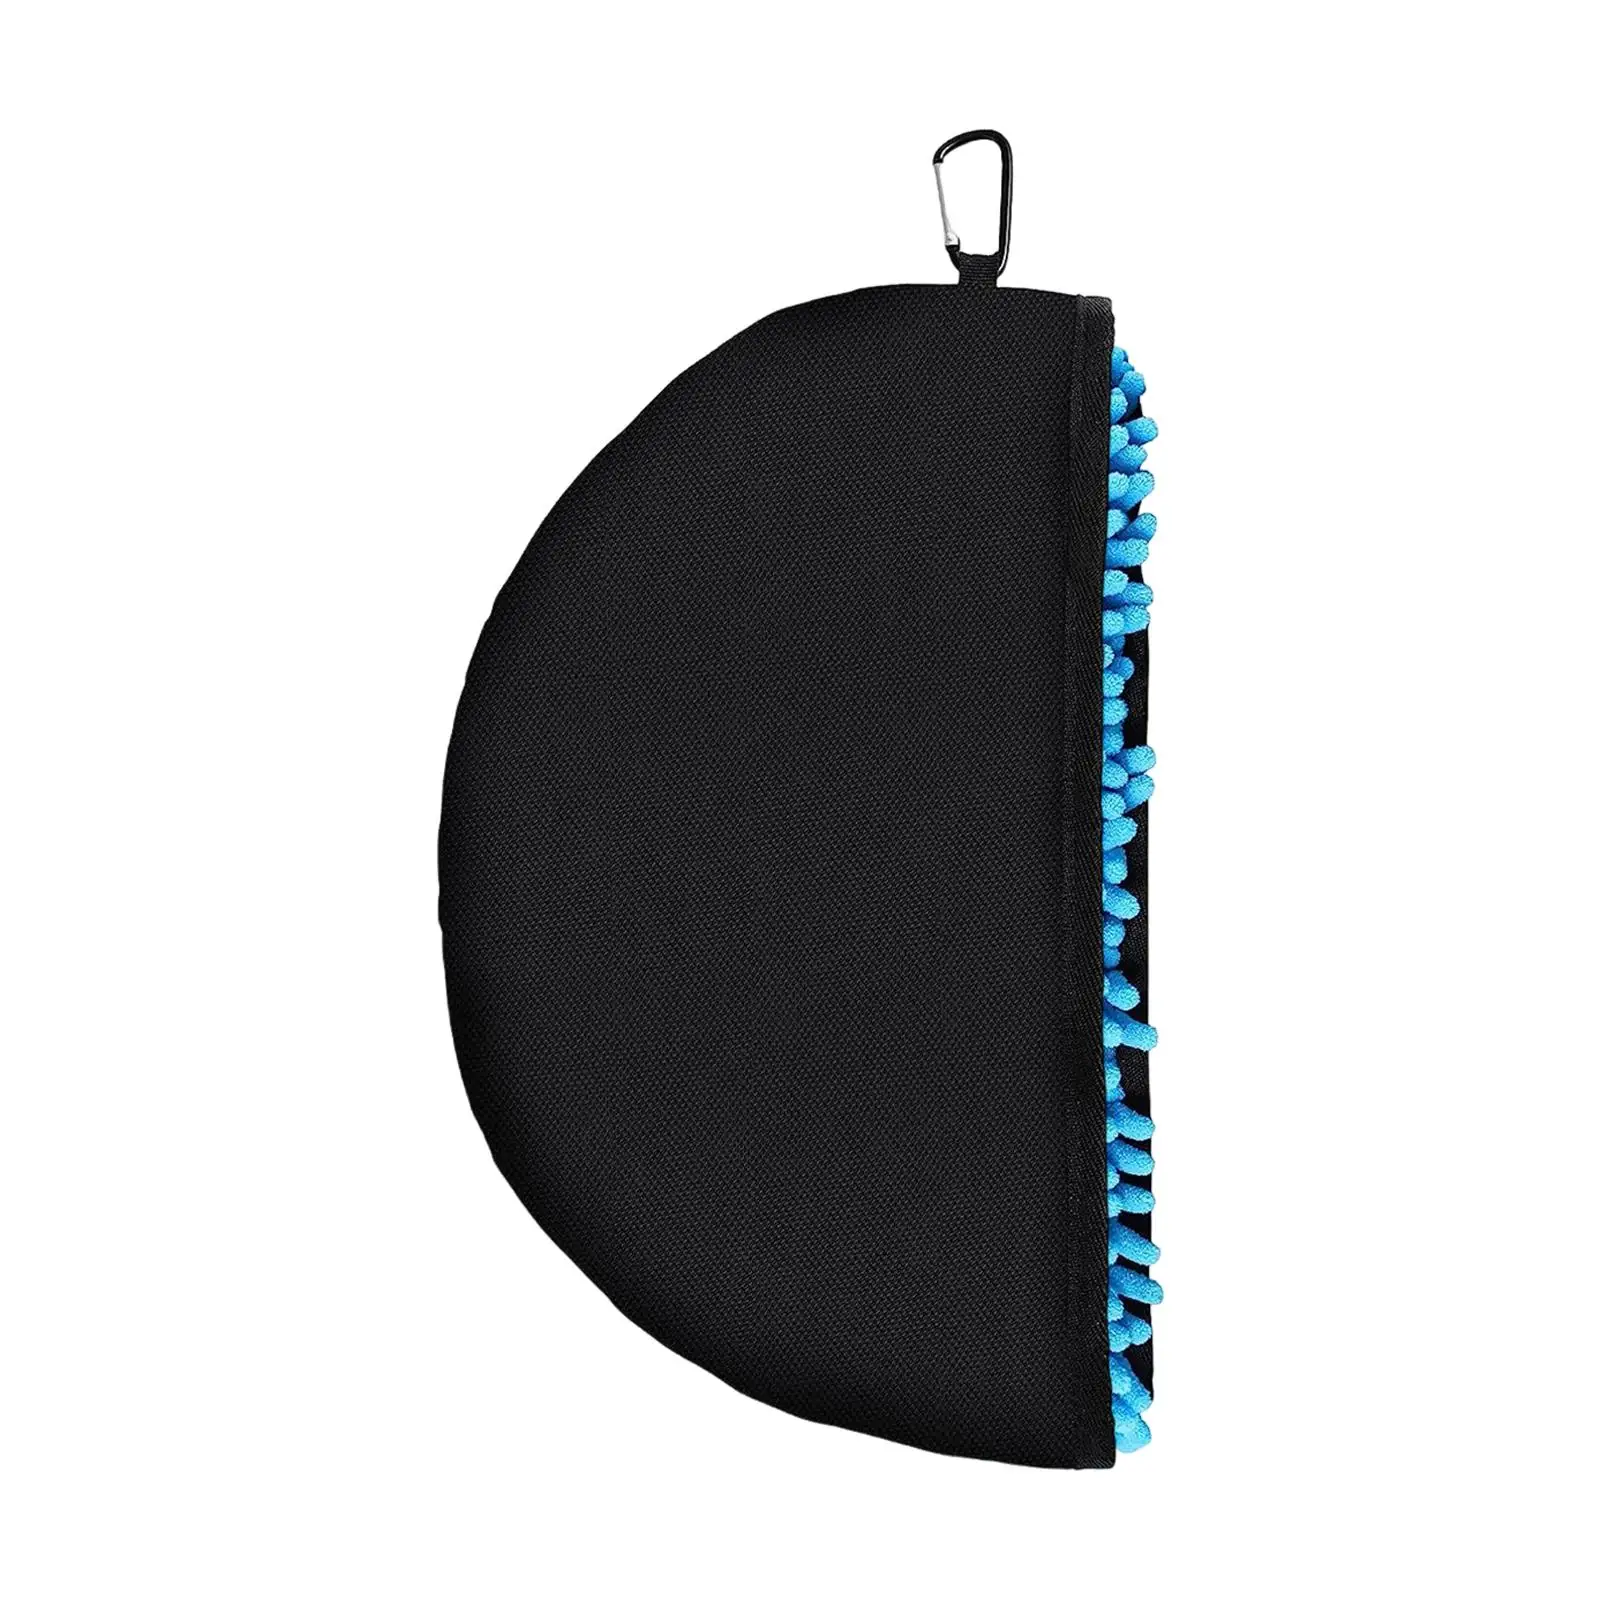 Disc Golf Cleaning Tool Indoor Outdoor Tote Target Accessories Cleaner Cleaning Towel Case with Metal Clip for Beginner Outdoor